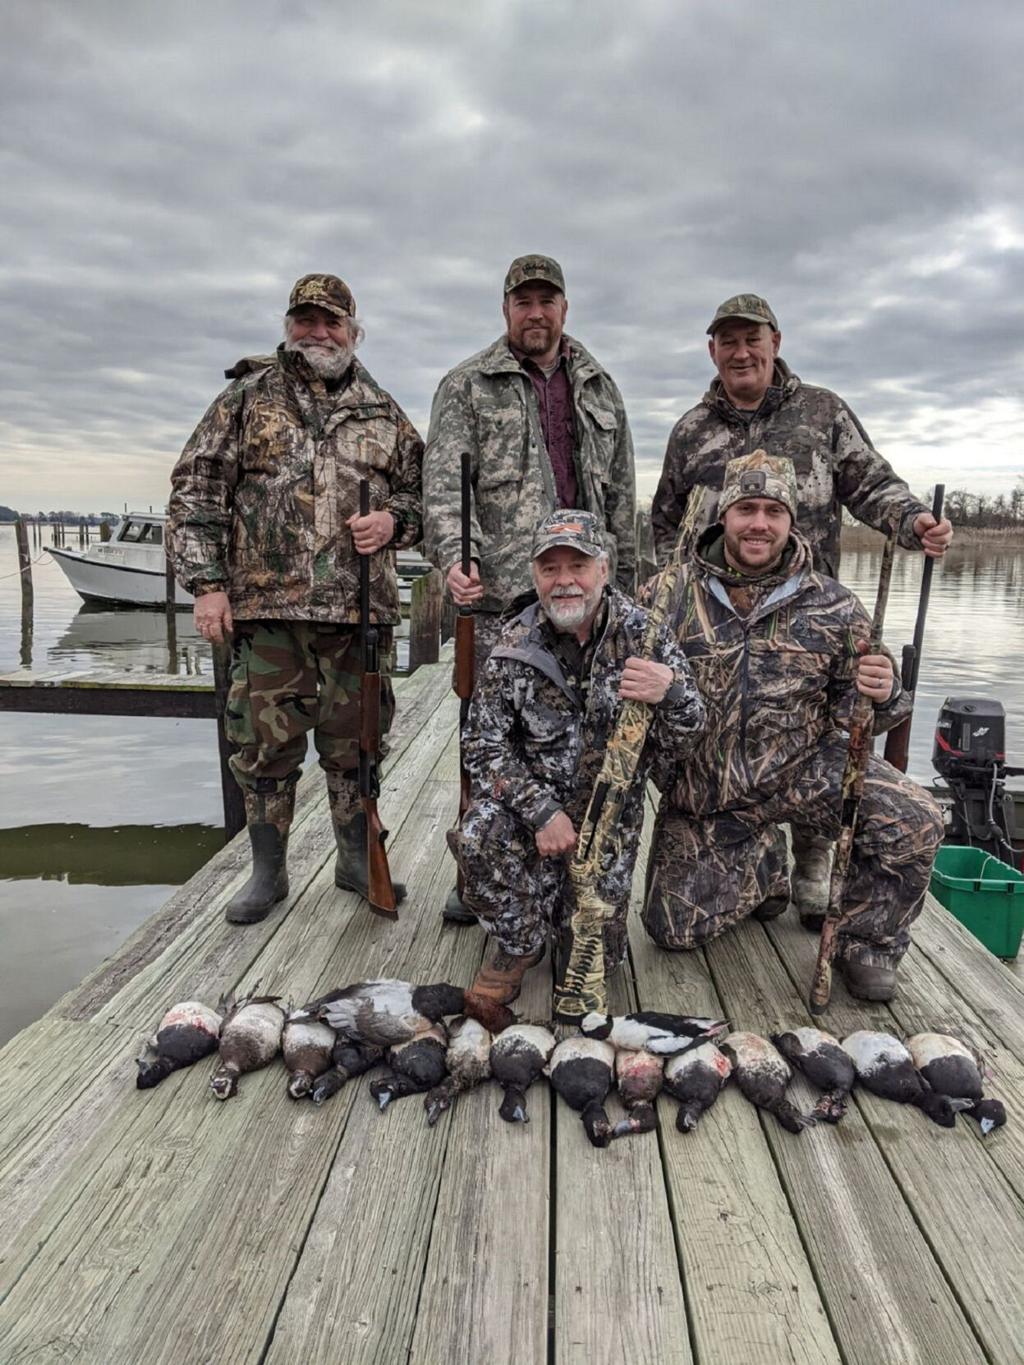 OUTDOORS: For duck hunters world-class water fowling is as close as the  Maryland Eastern Shore, Sports